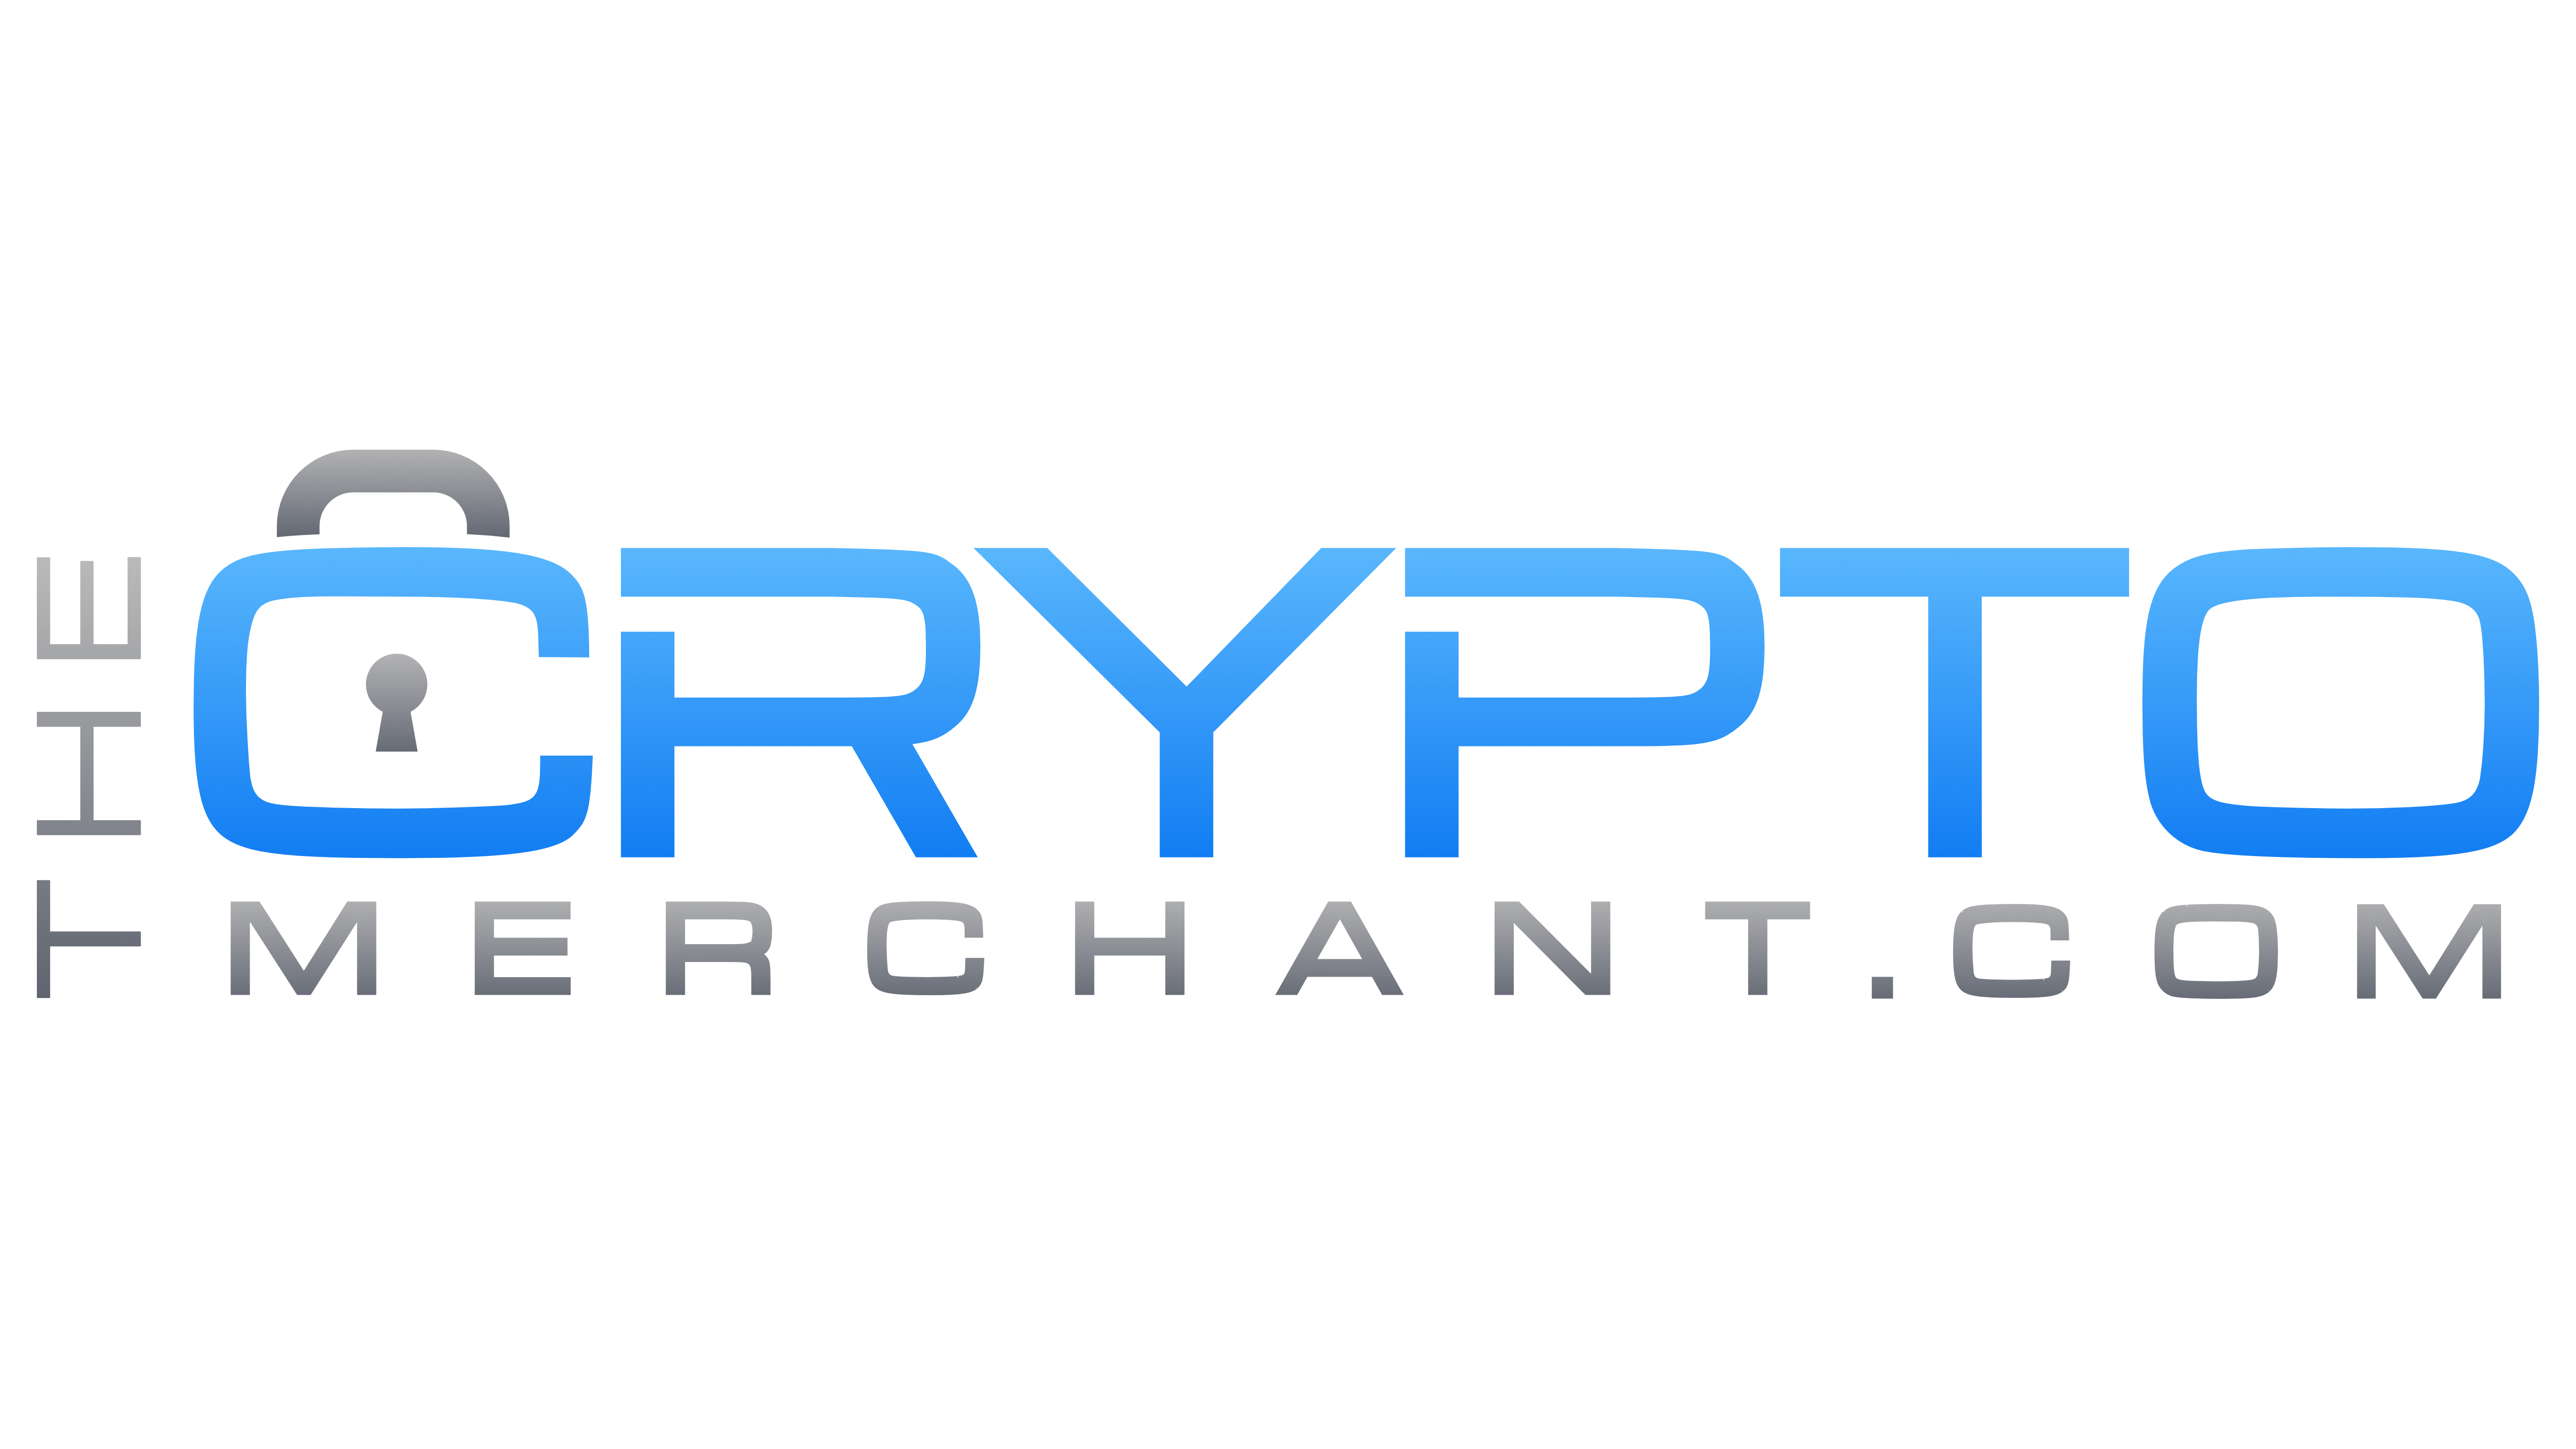 Best Stainless Steel Crypto Recovery Tool | Apocalypse-Proof Seed Phrase Kit